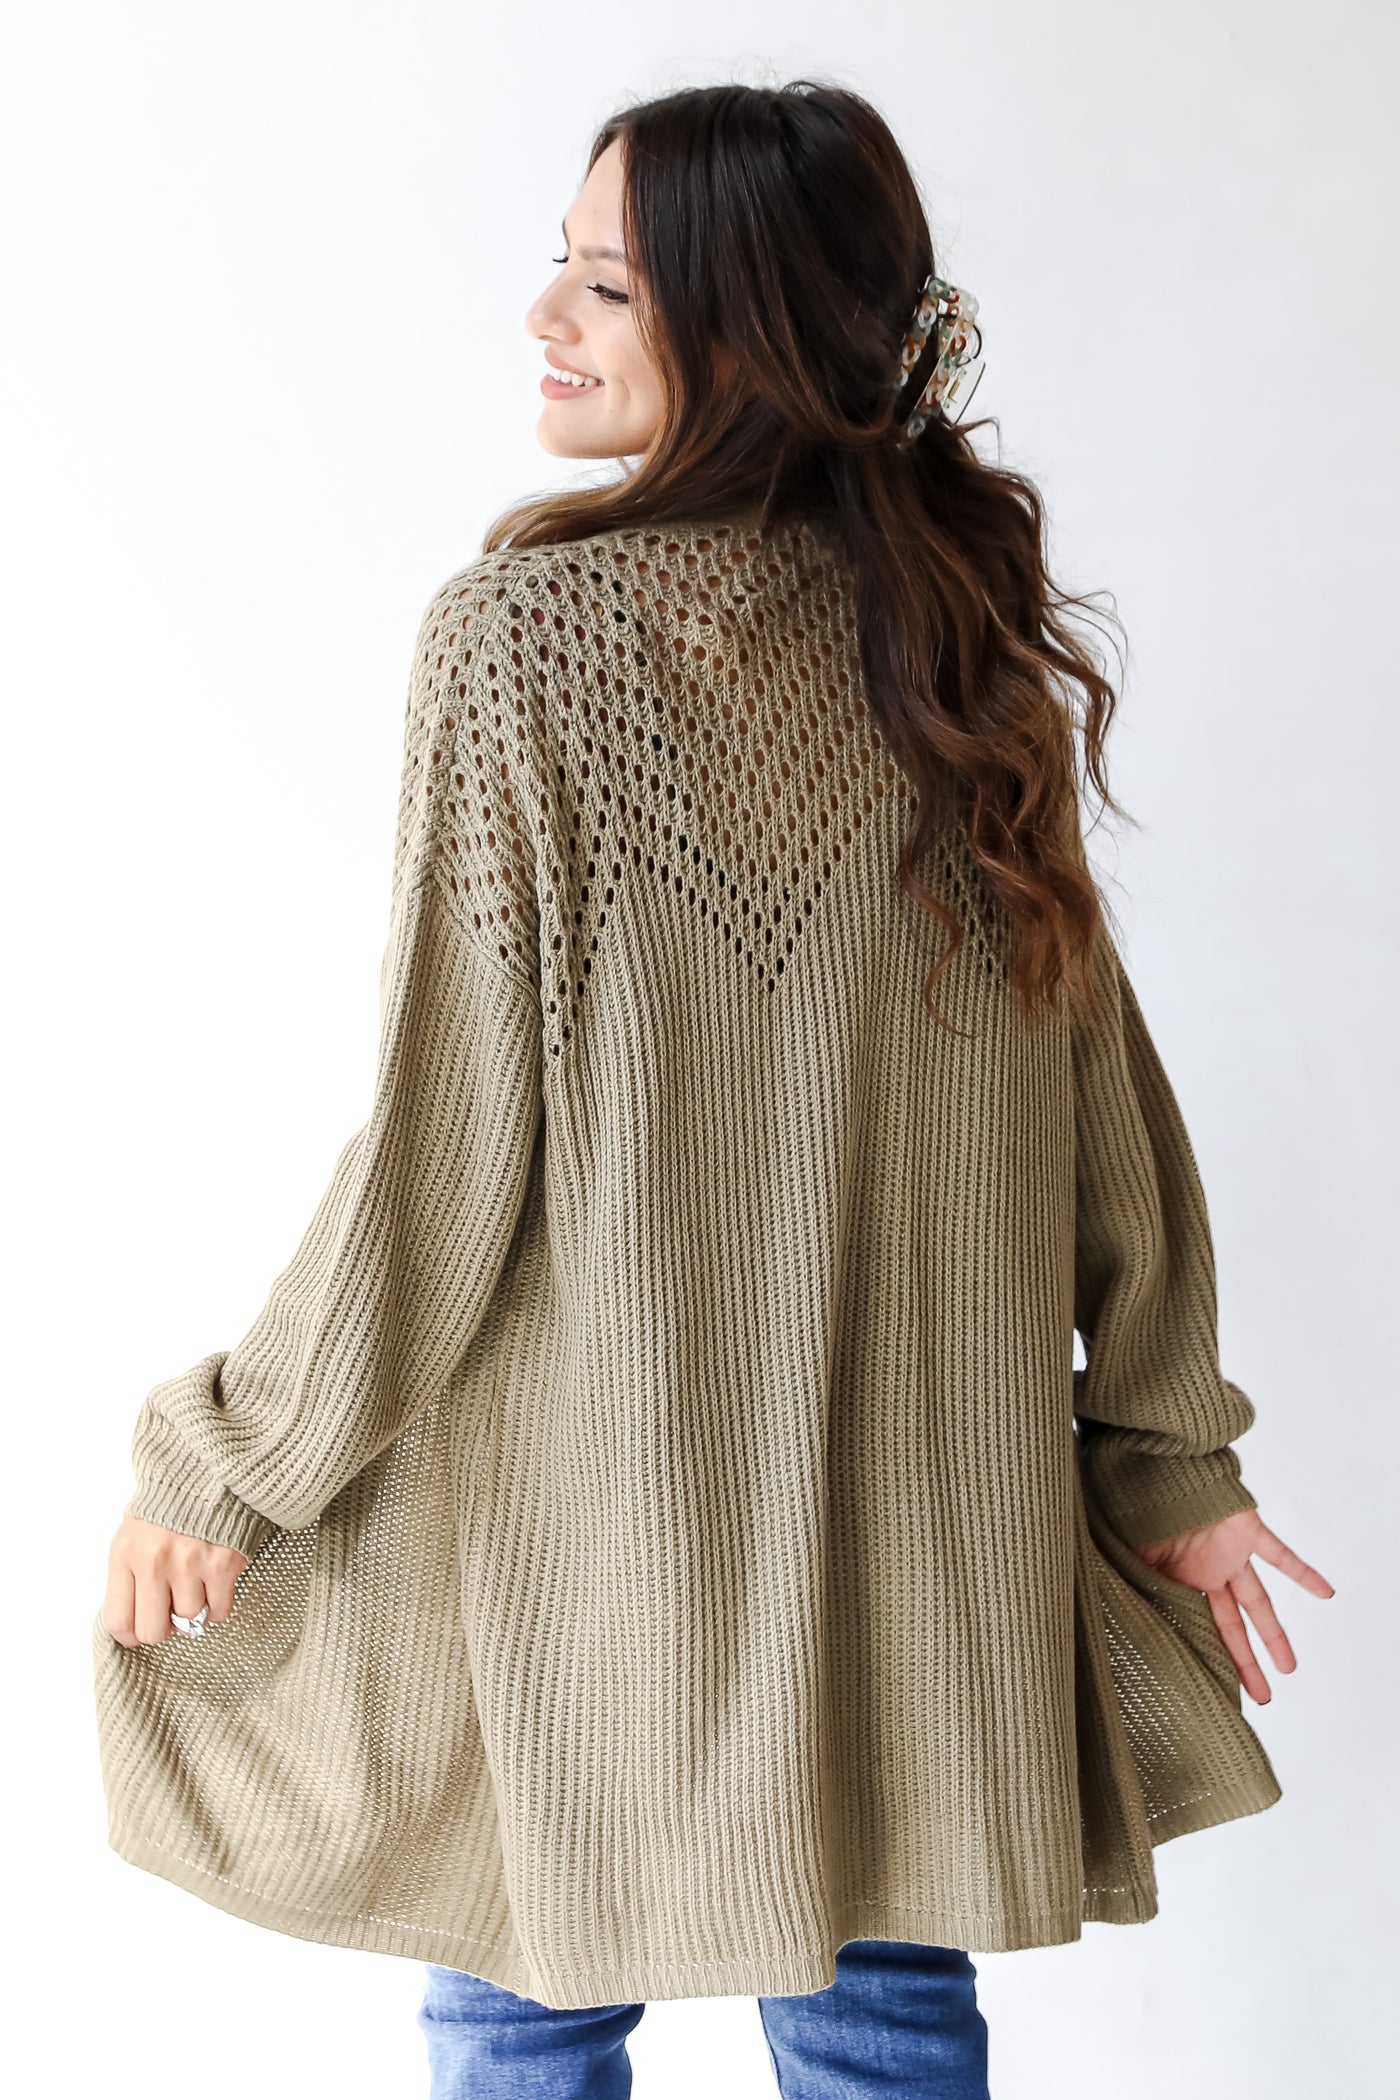 olive knit cardigan back view